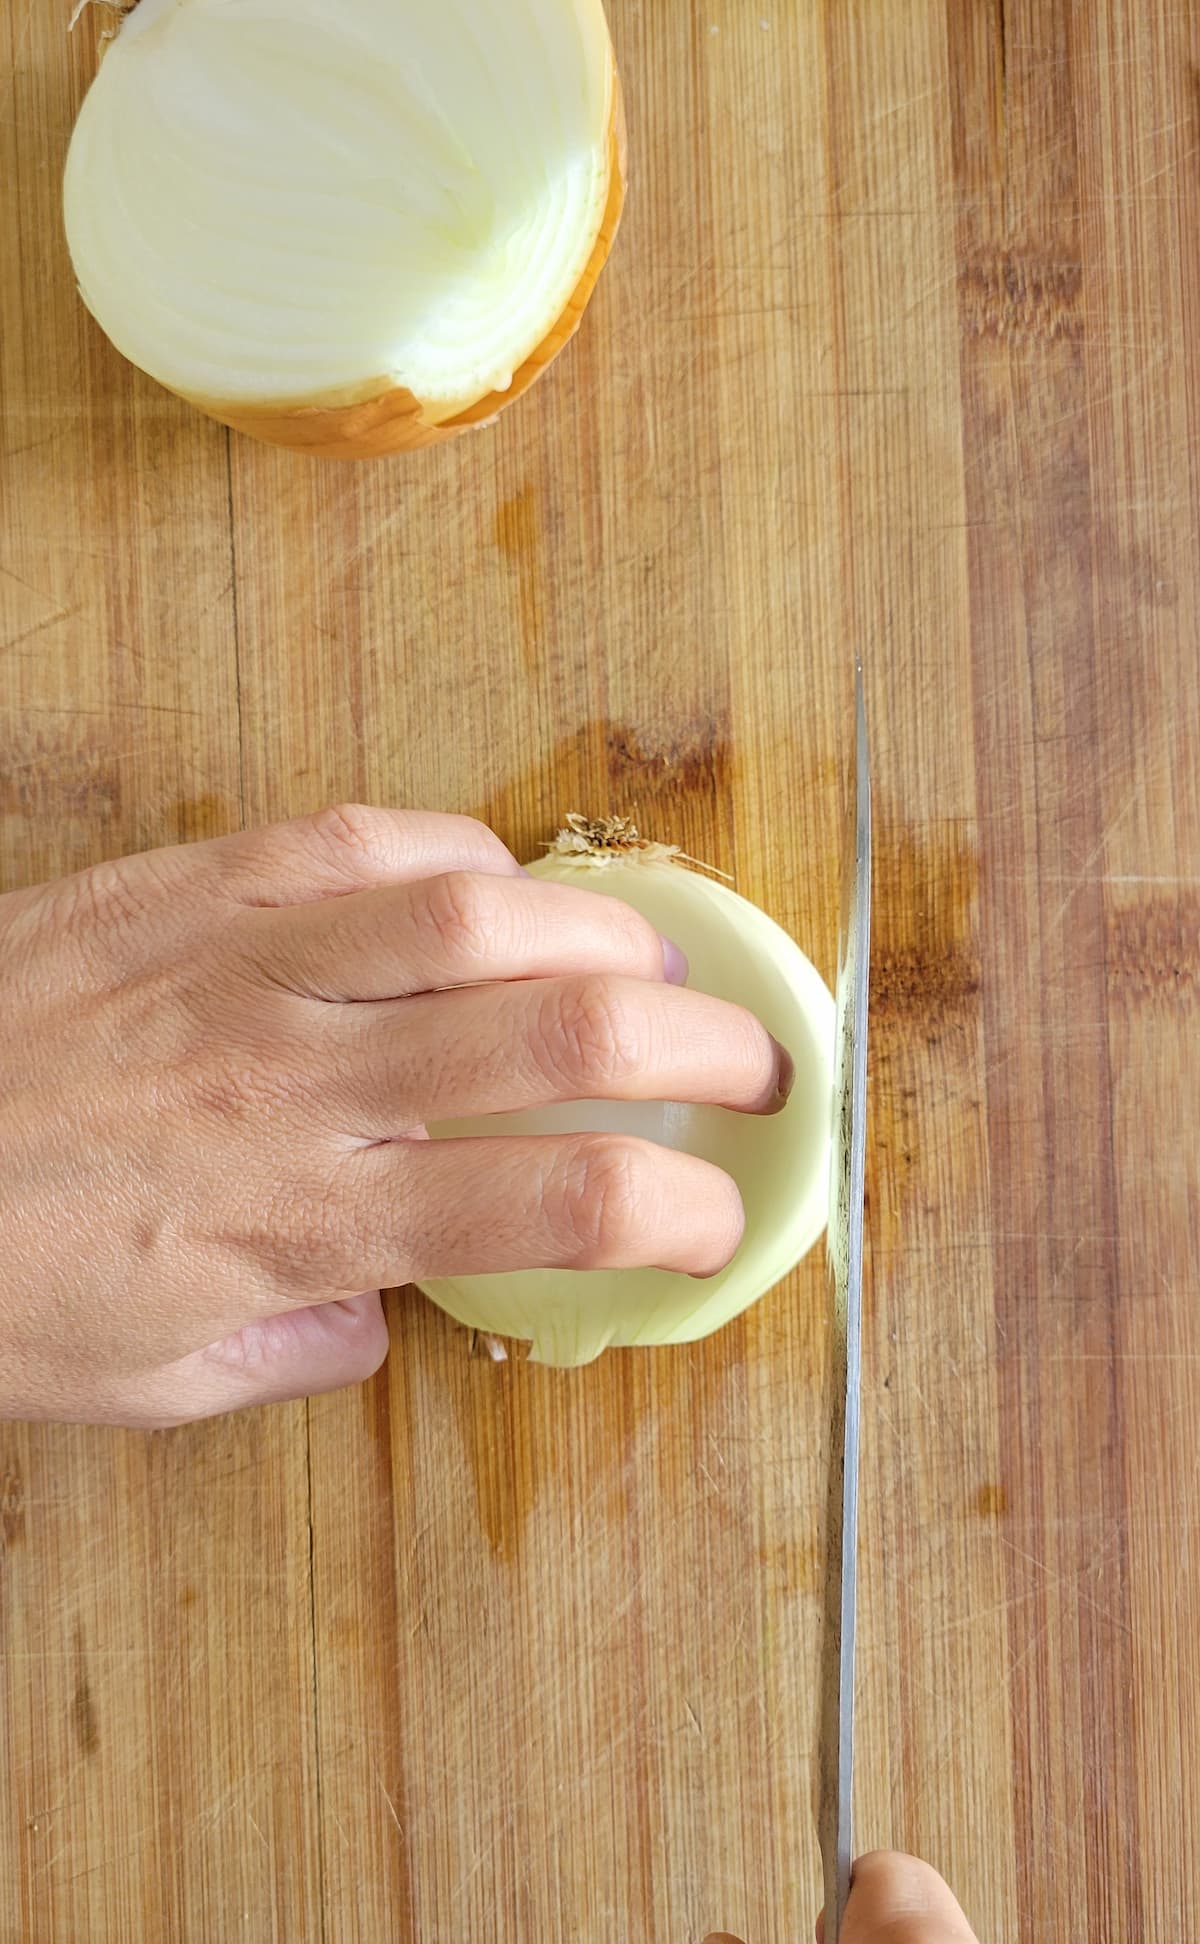 hands with a knife slicing a raw white onion